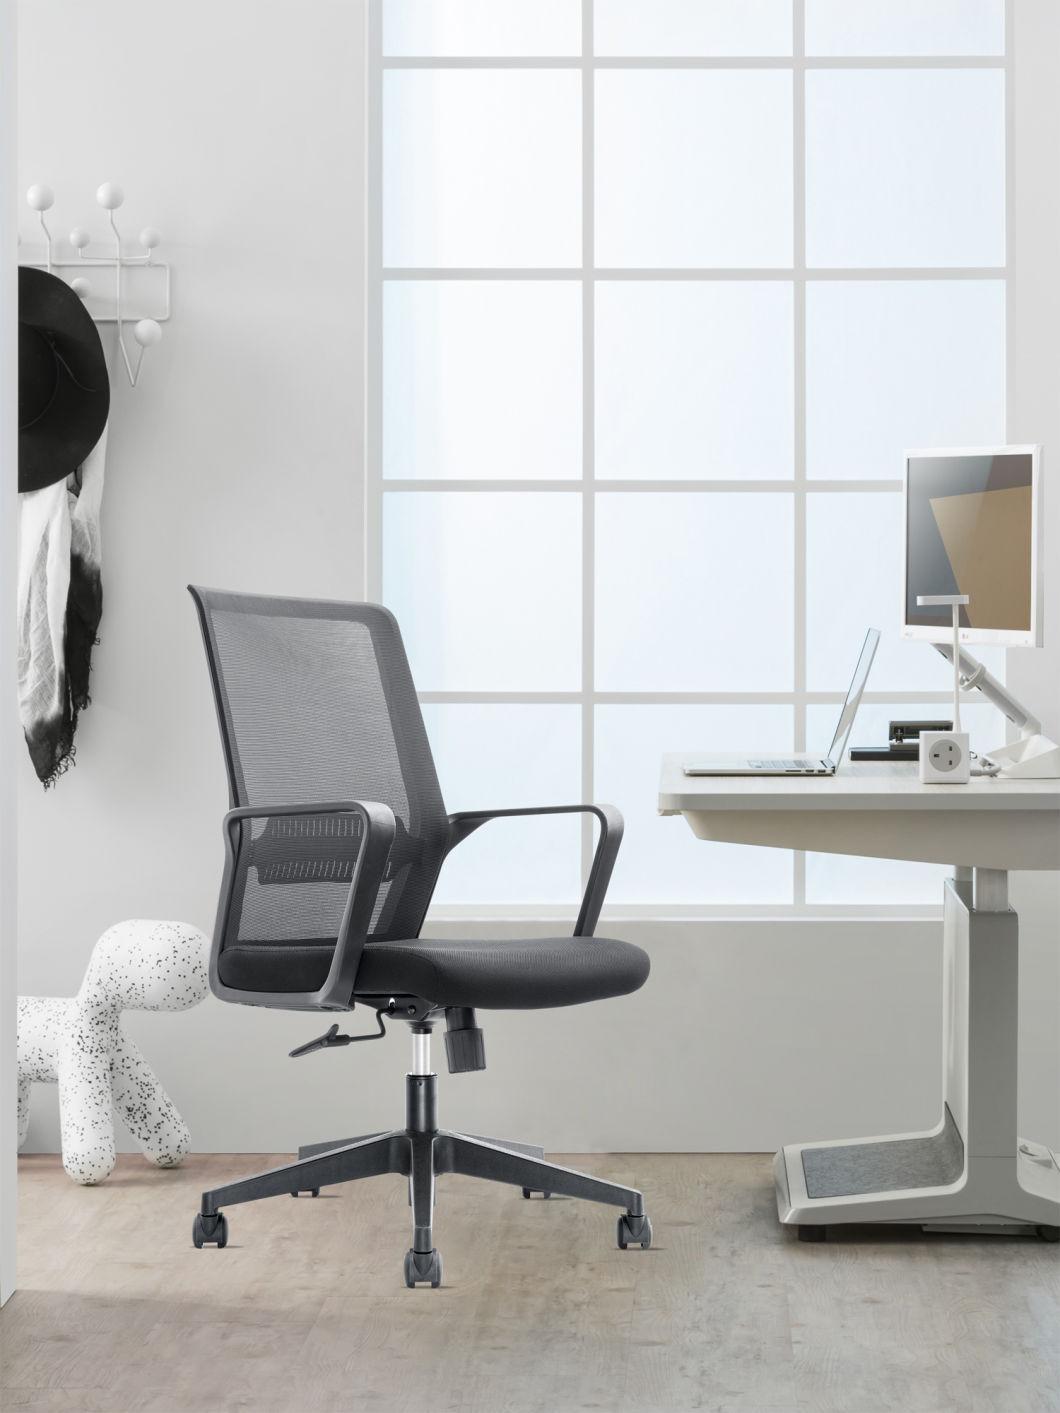 Cheap Wholesale MID-Back Mesh Staff Task Chair